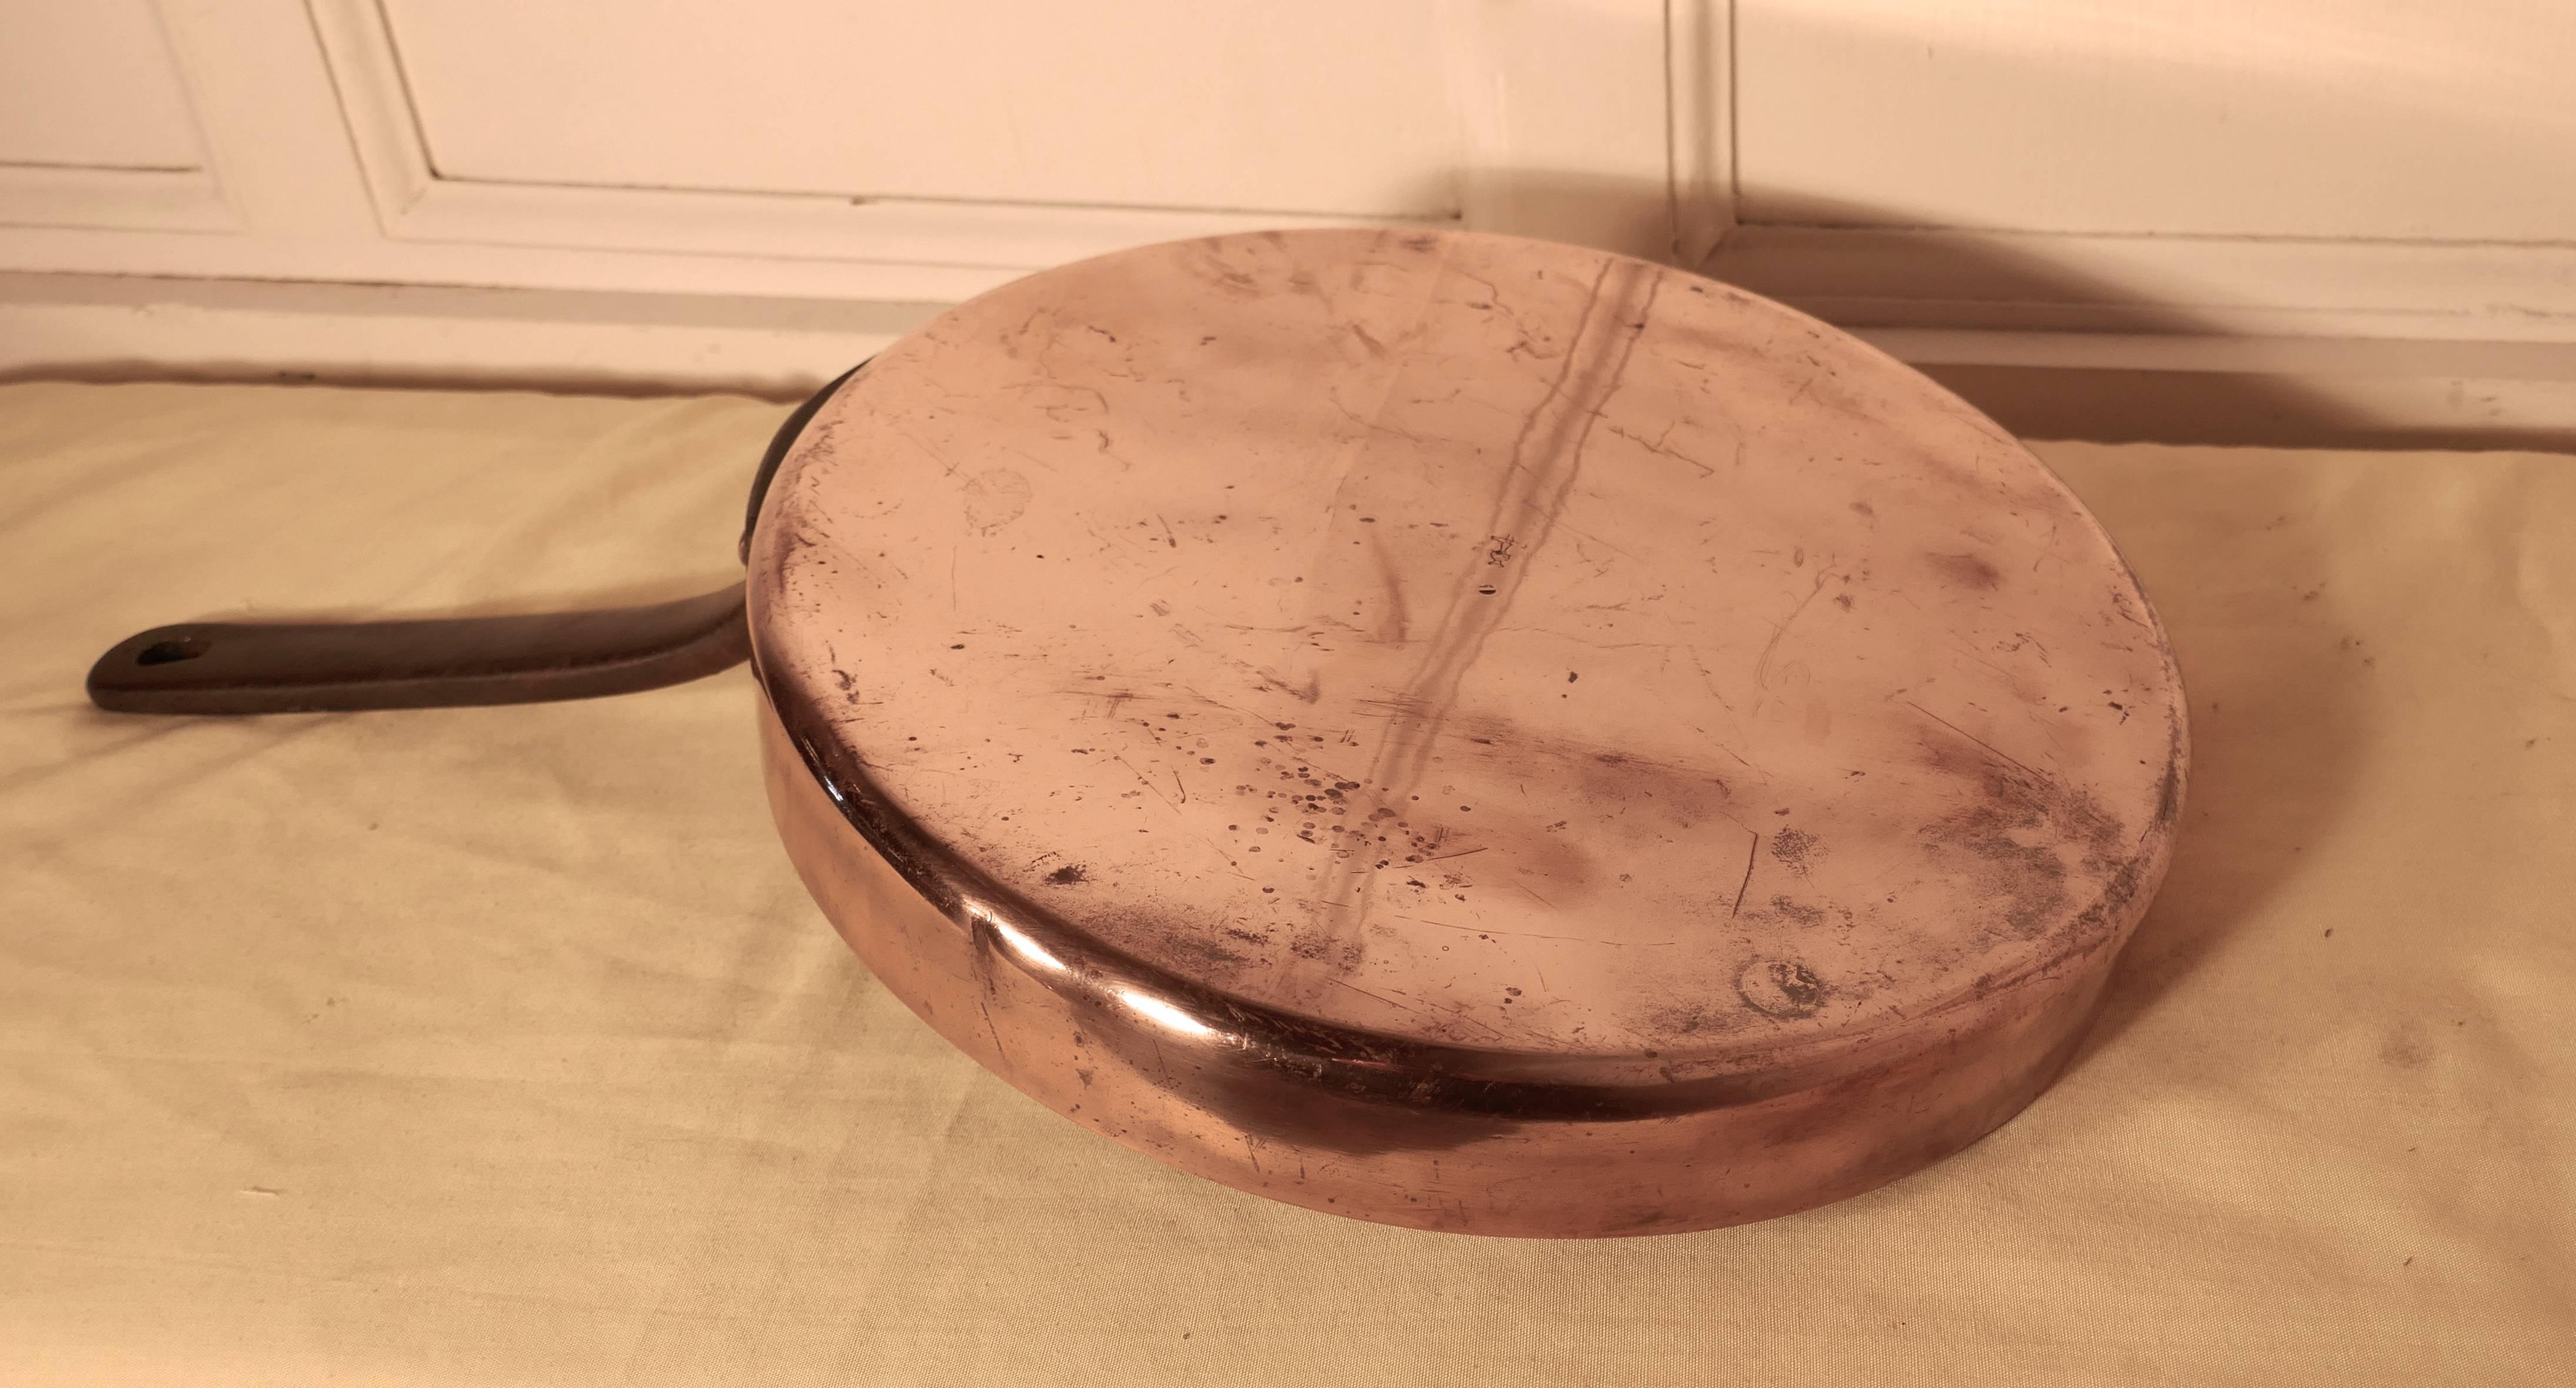 This is a lovely looking 18th century frying pan, the pan was obviously a very treasured piece, it has a riveted iron handle, high sides and is flat bottomed
The pan is in good condition for its age and has a charming patina

The pan is 21”